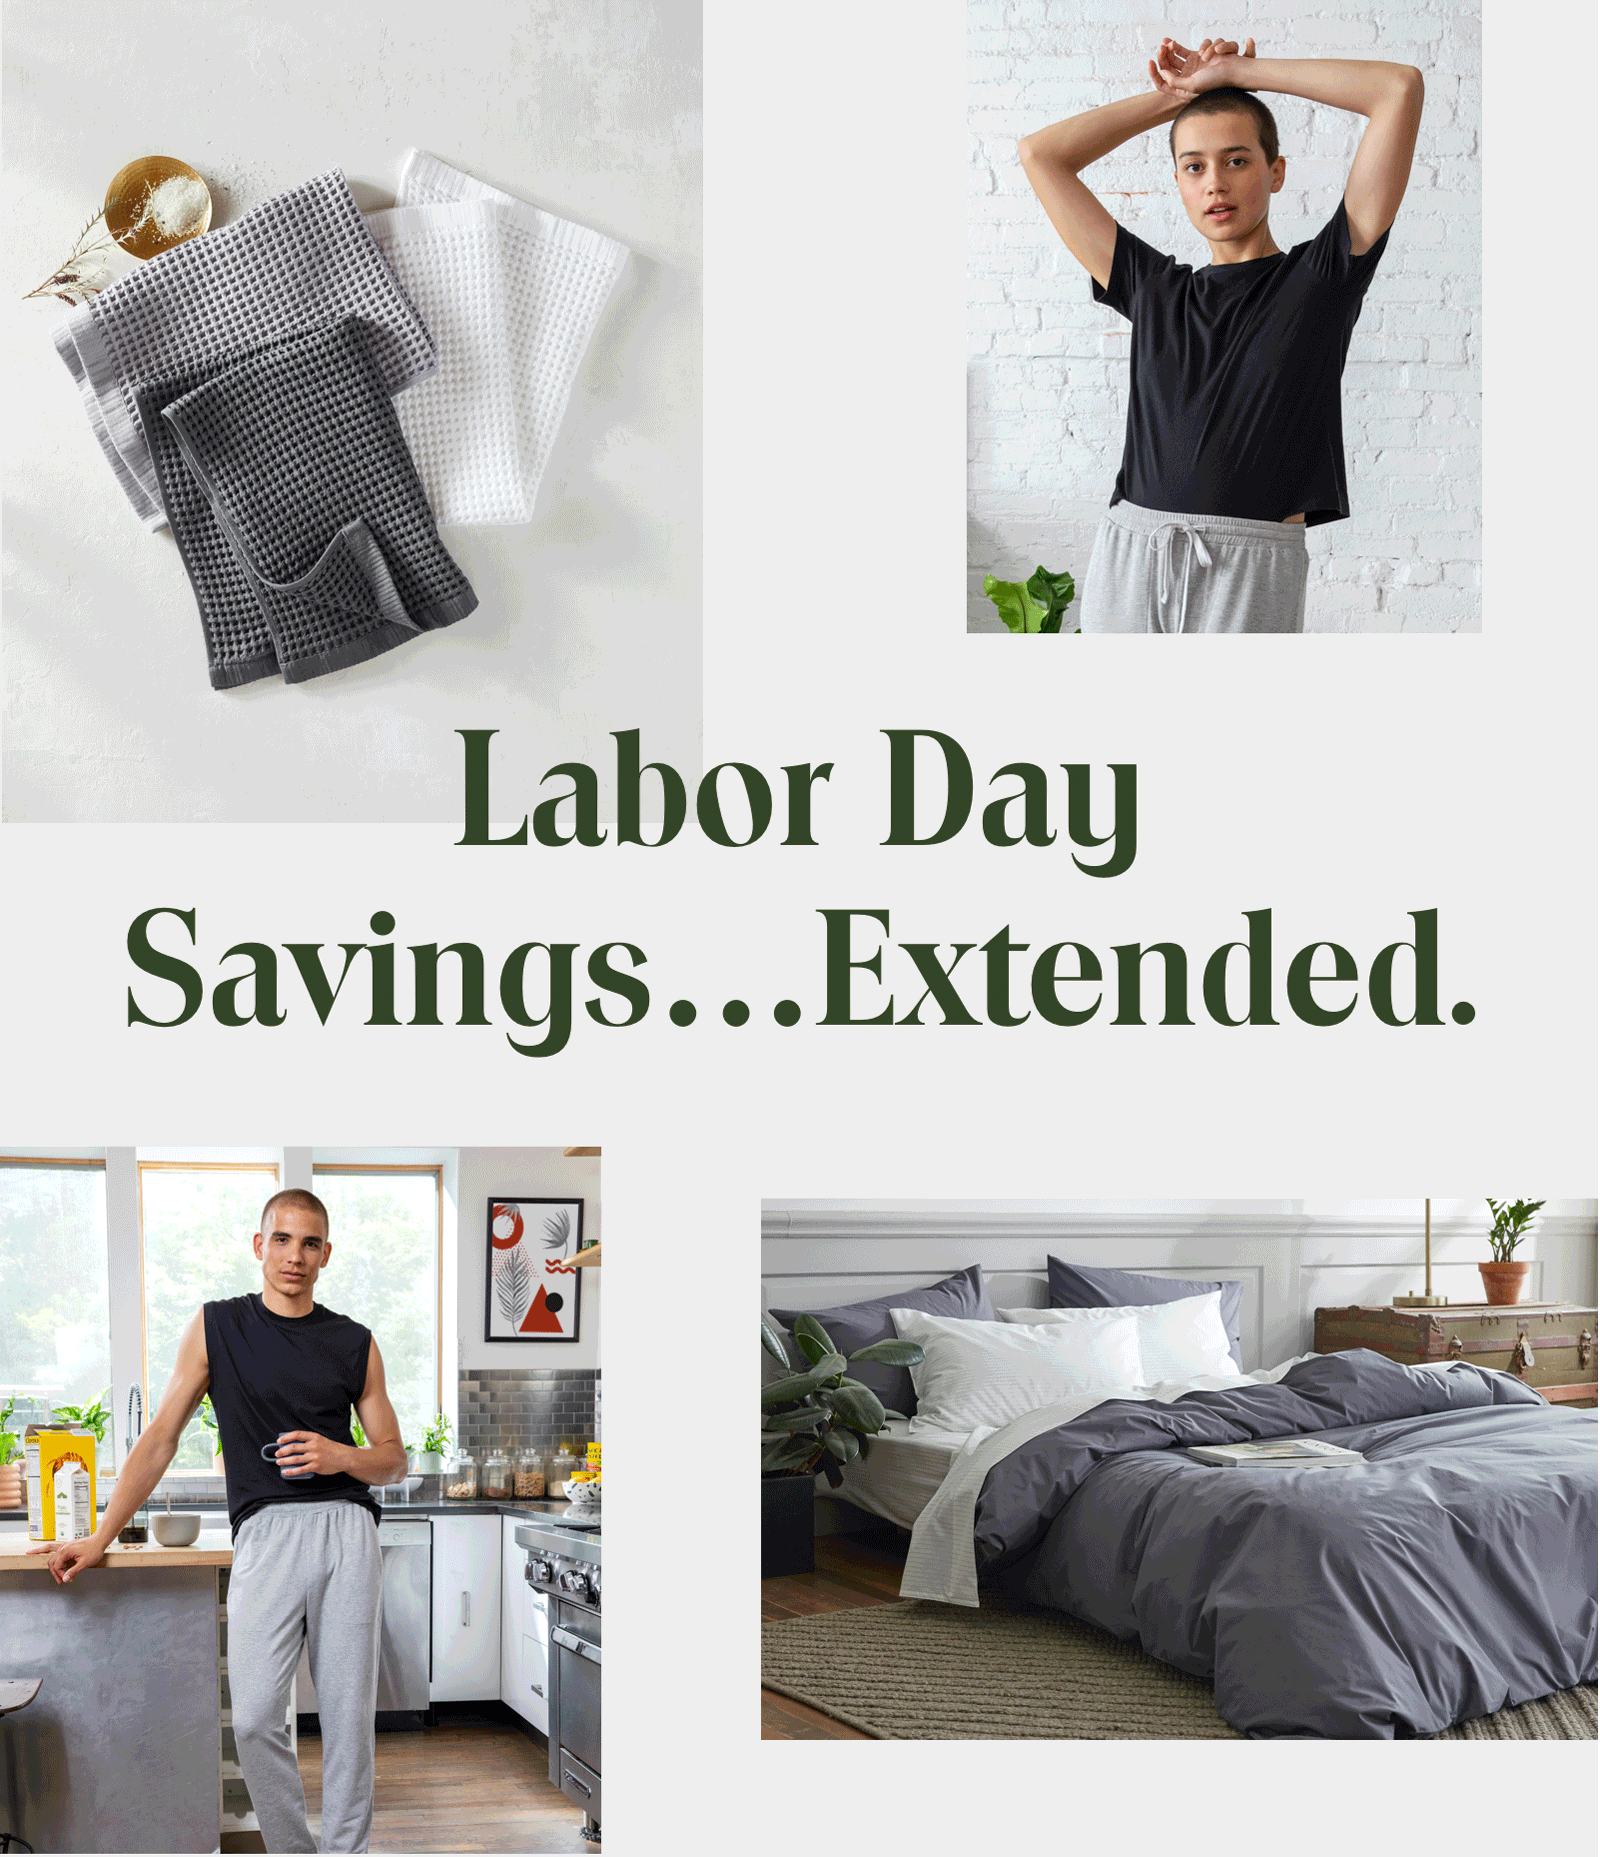 Labor Day Savings...Extended.